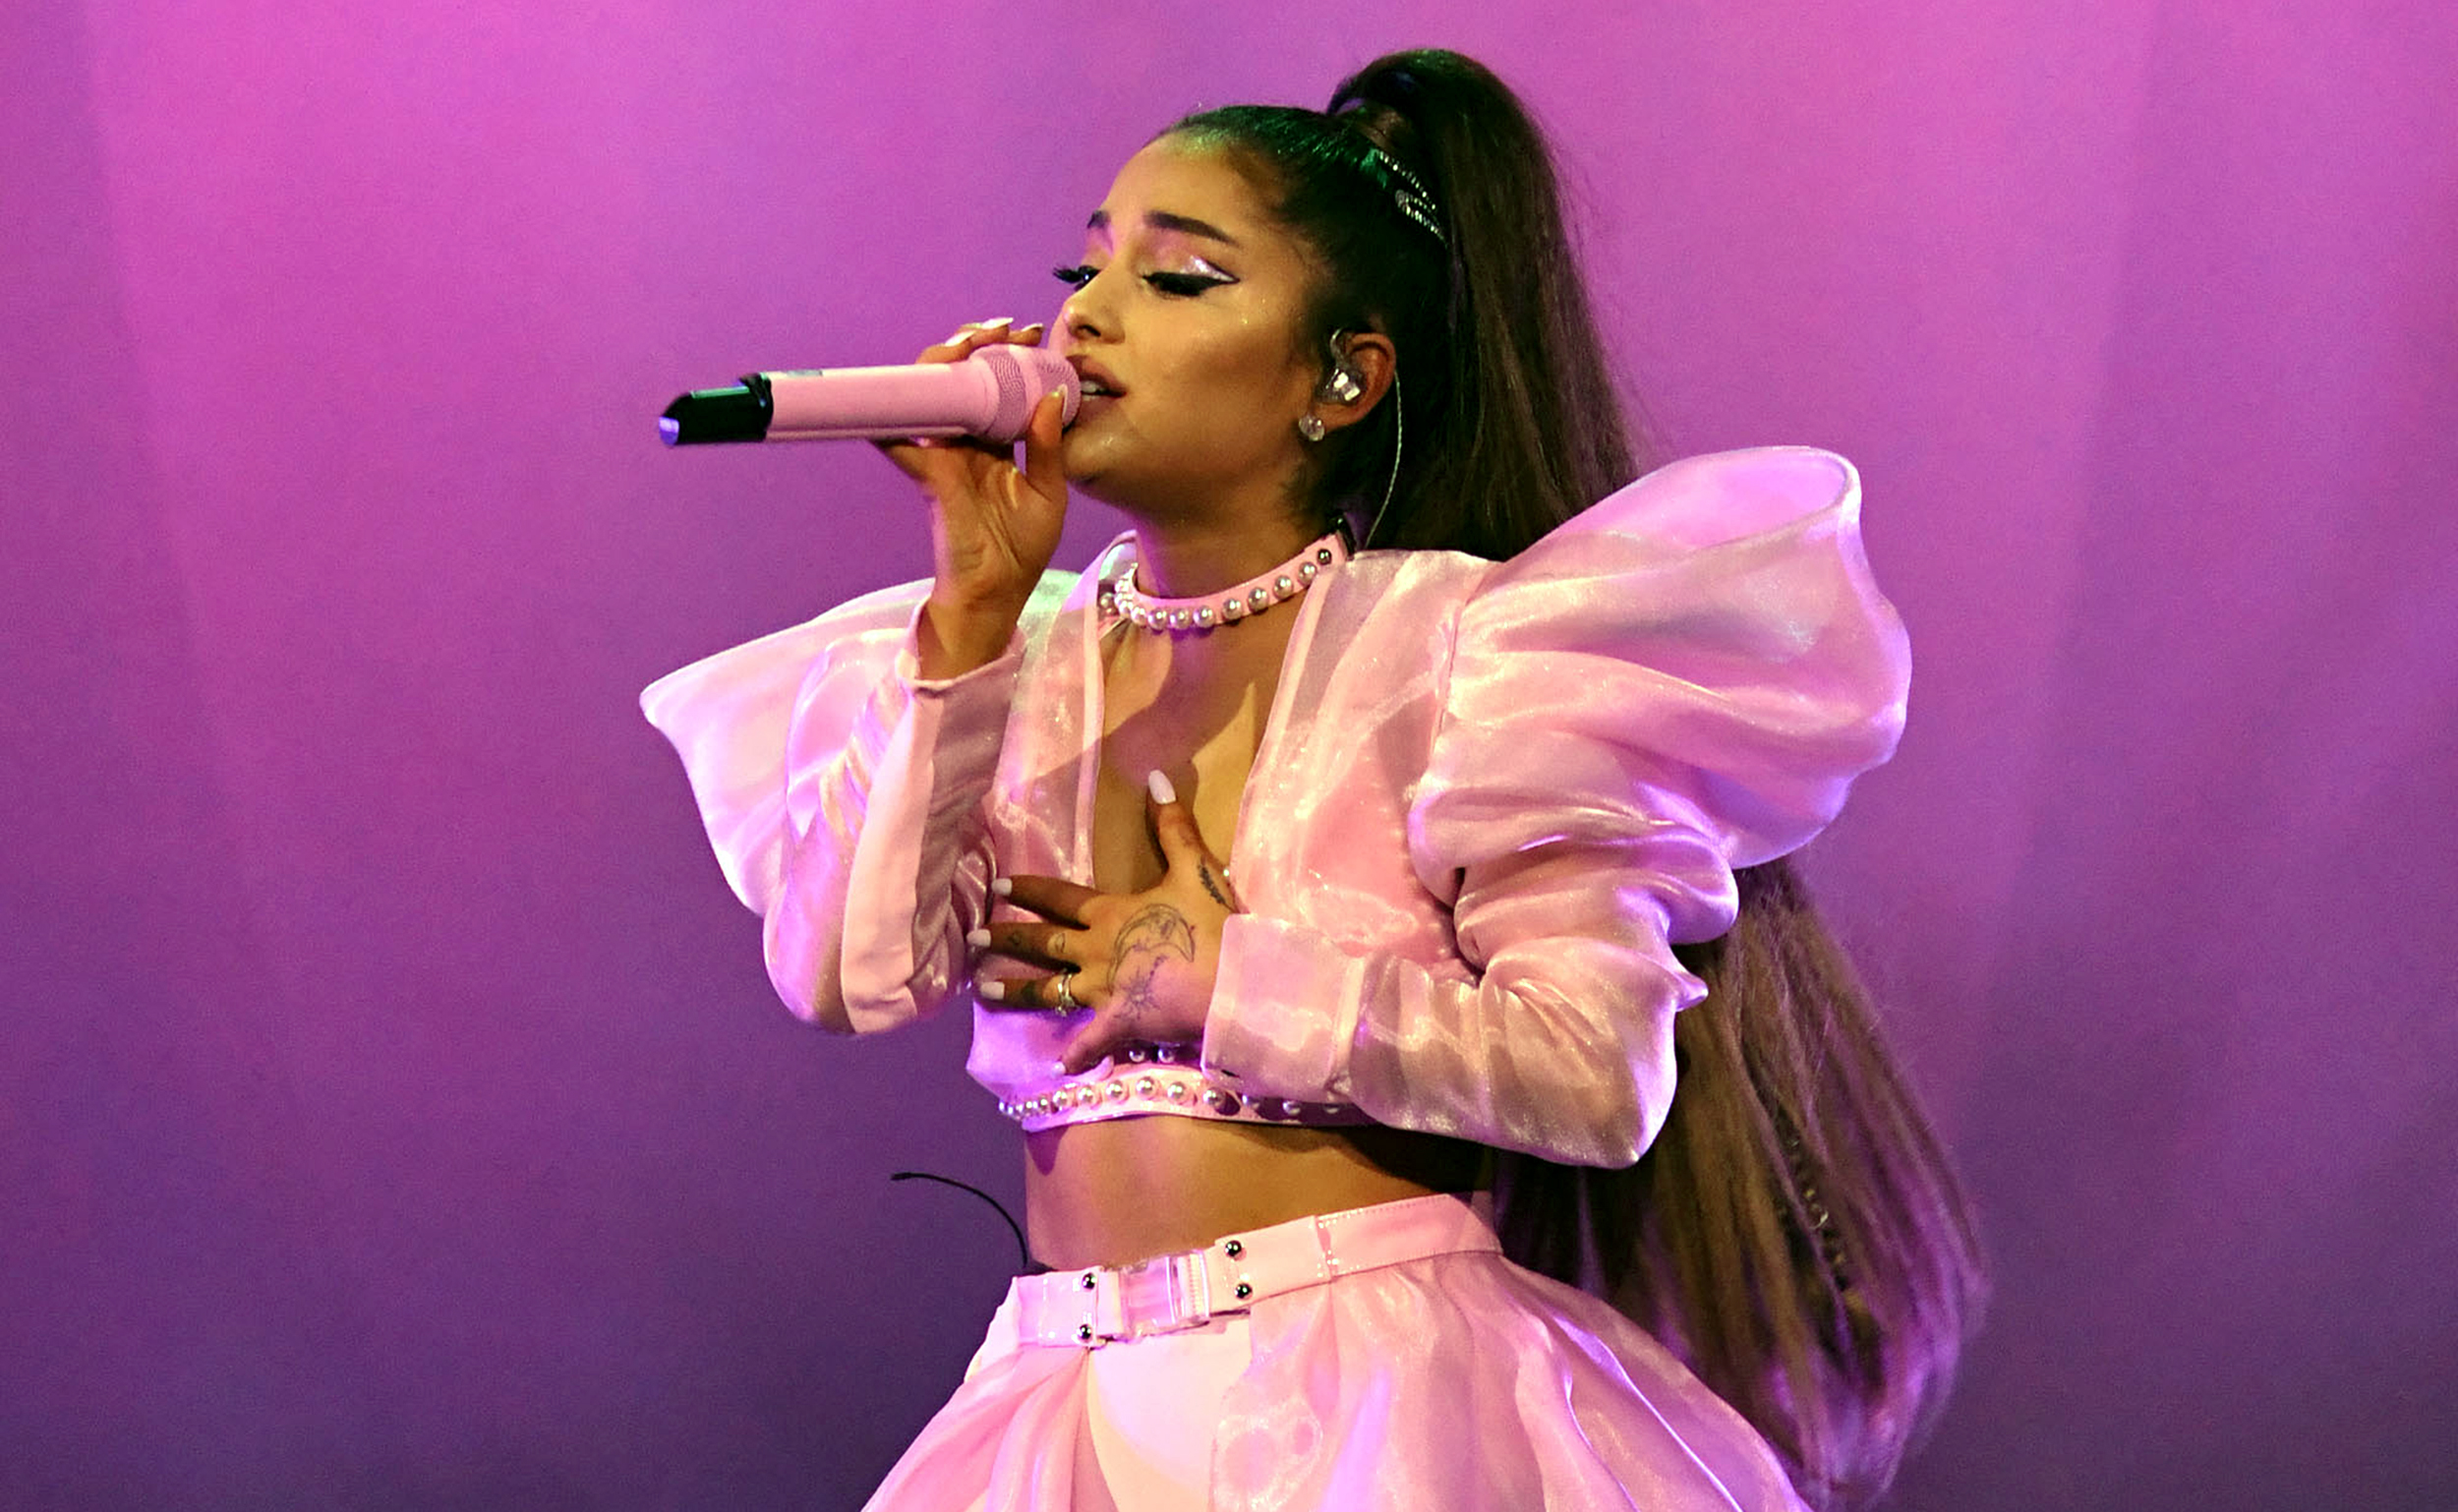 Ariana Grande wearing a pink outfit while holding a pink mic